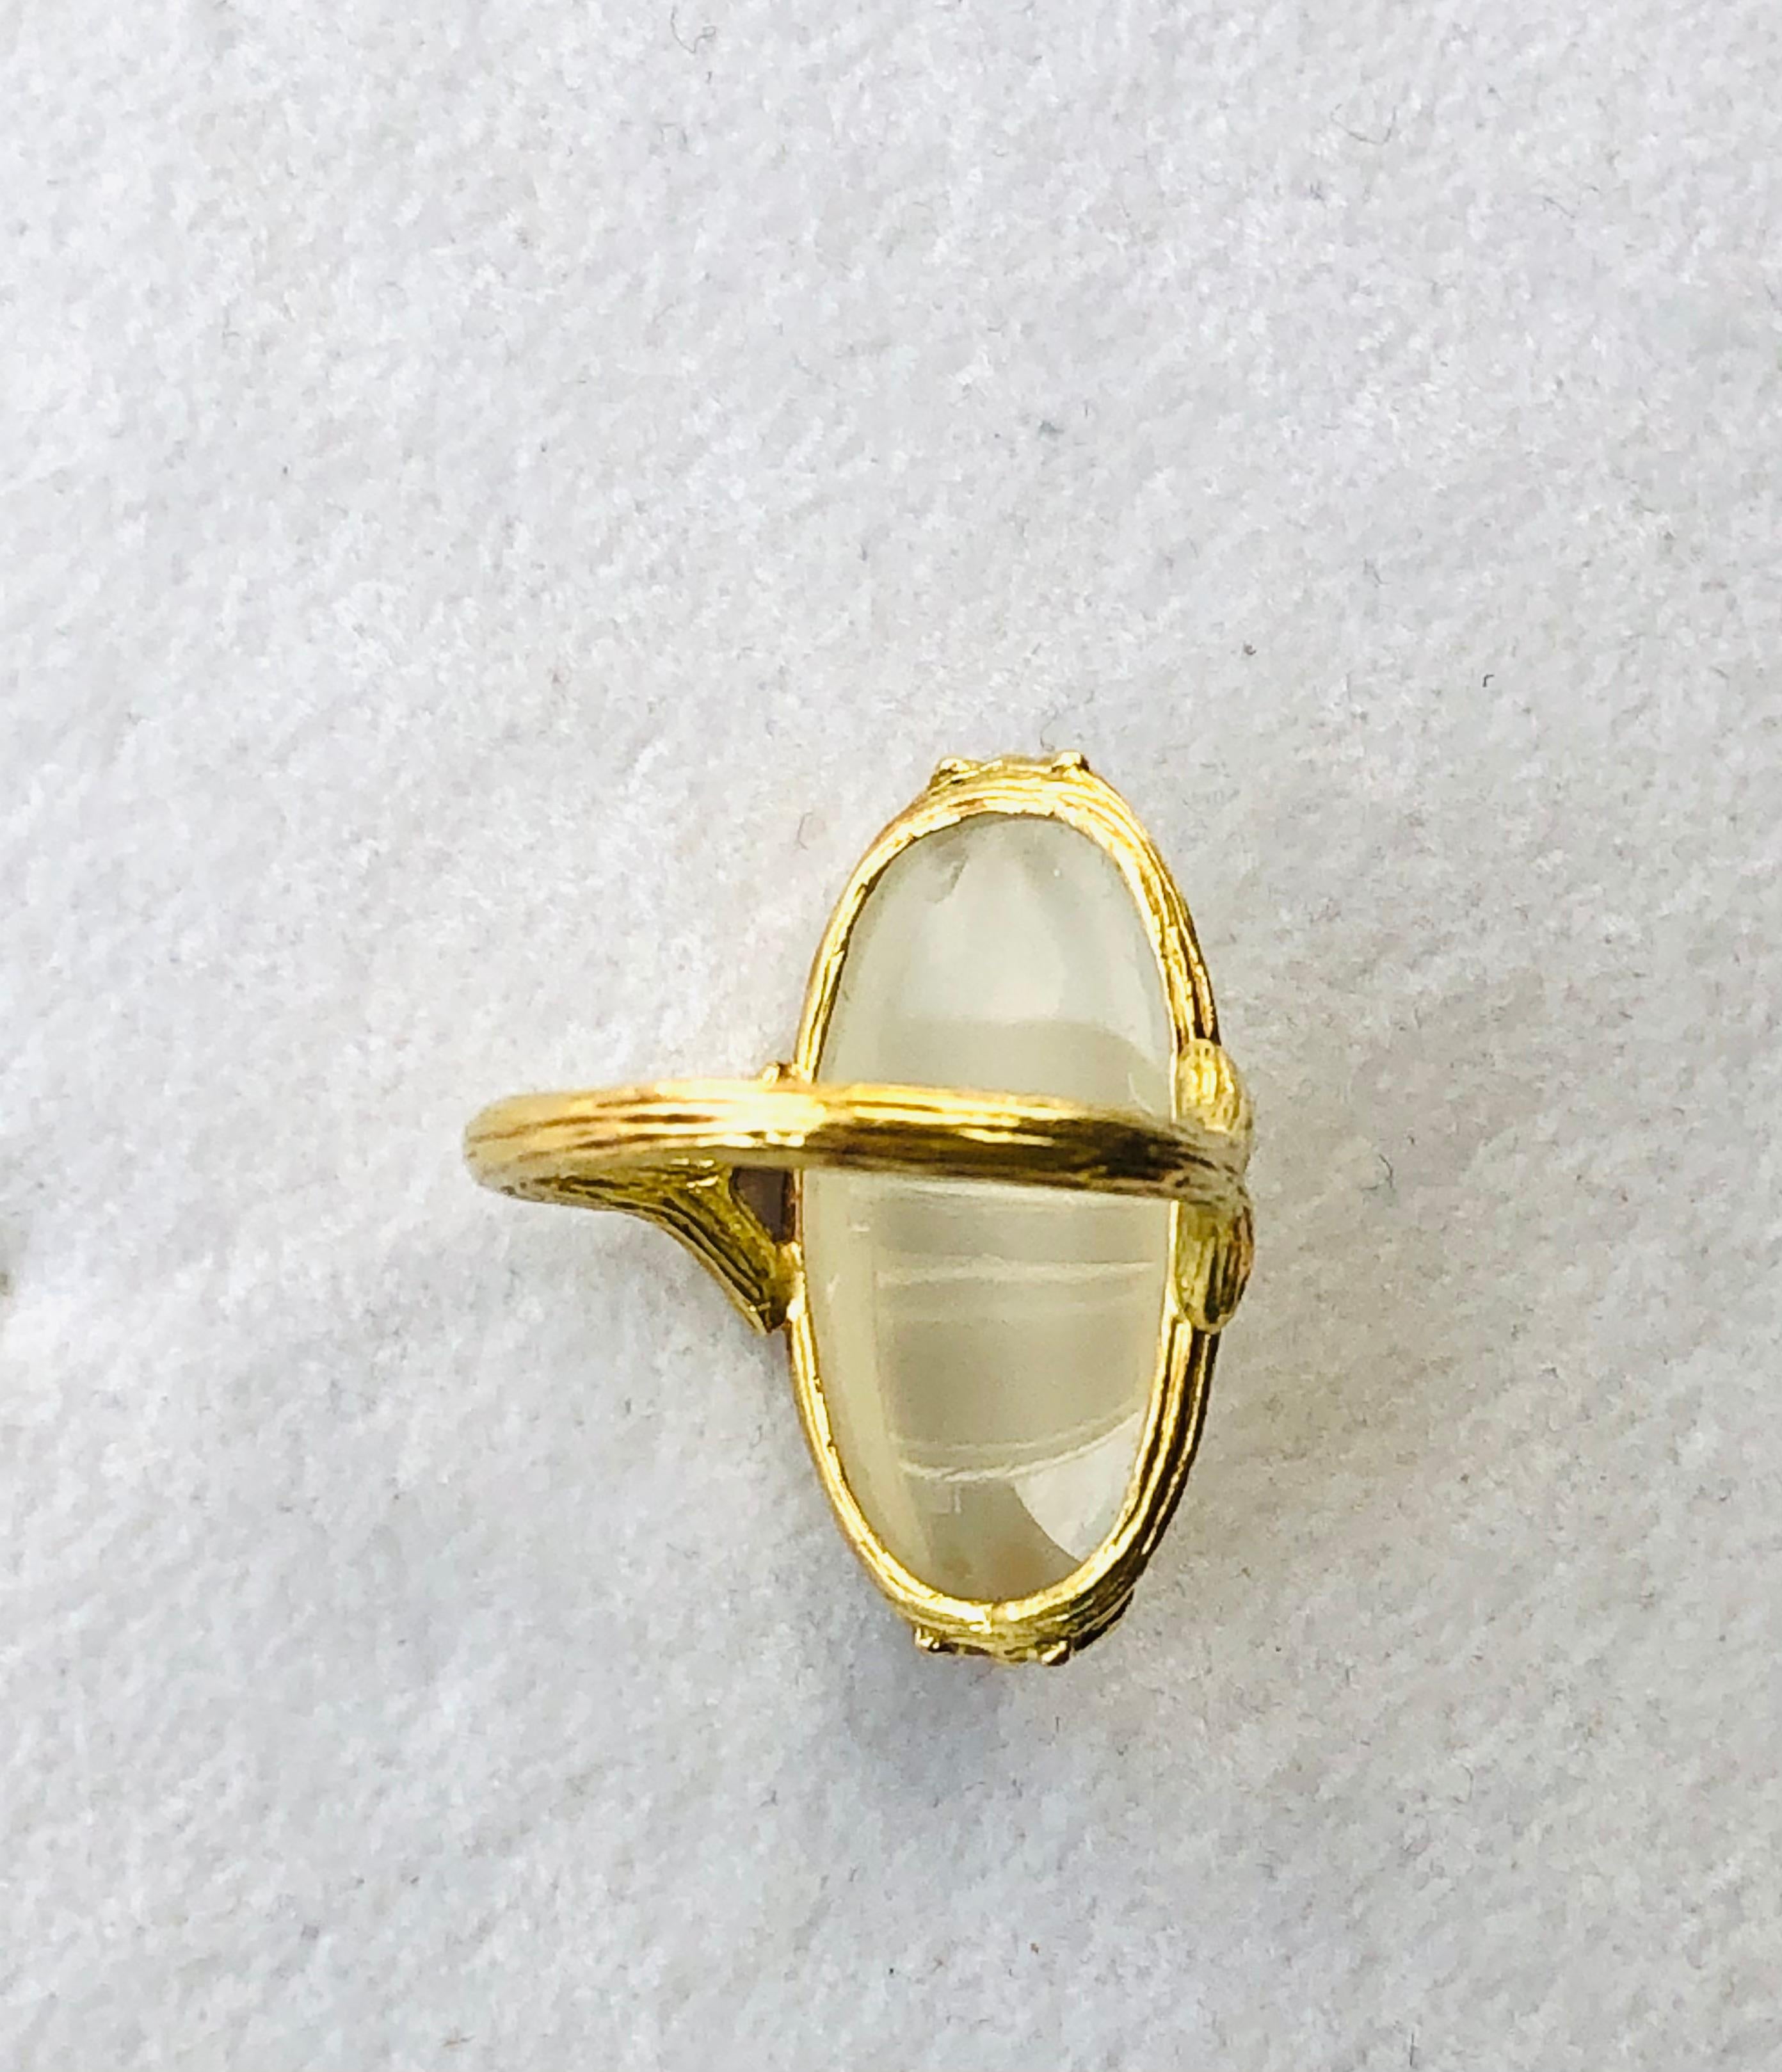 Smooth and voluptuous, this elongated oval moonstone cabochon ring offers up a looking-glass that peers into the mysteries of life. Or so it seems. We won't be surprised if you find yourself staring into it off and on throughout the day. But we all